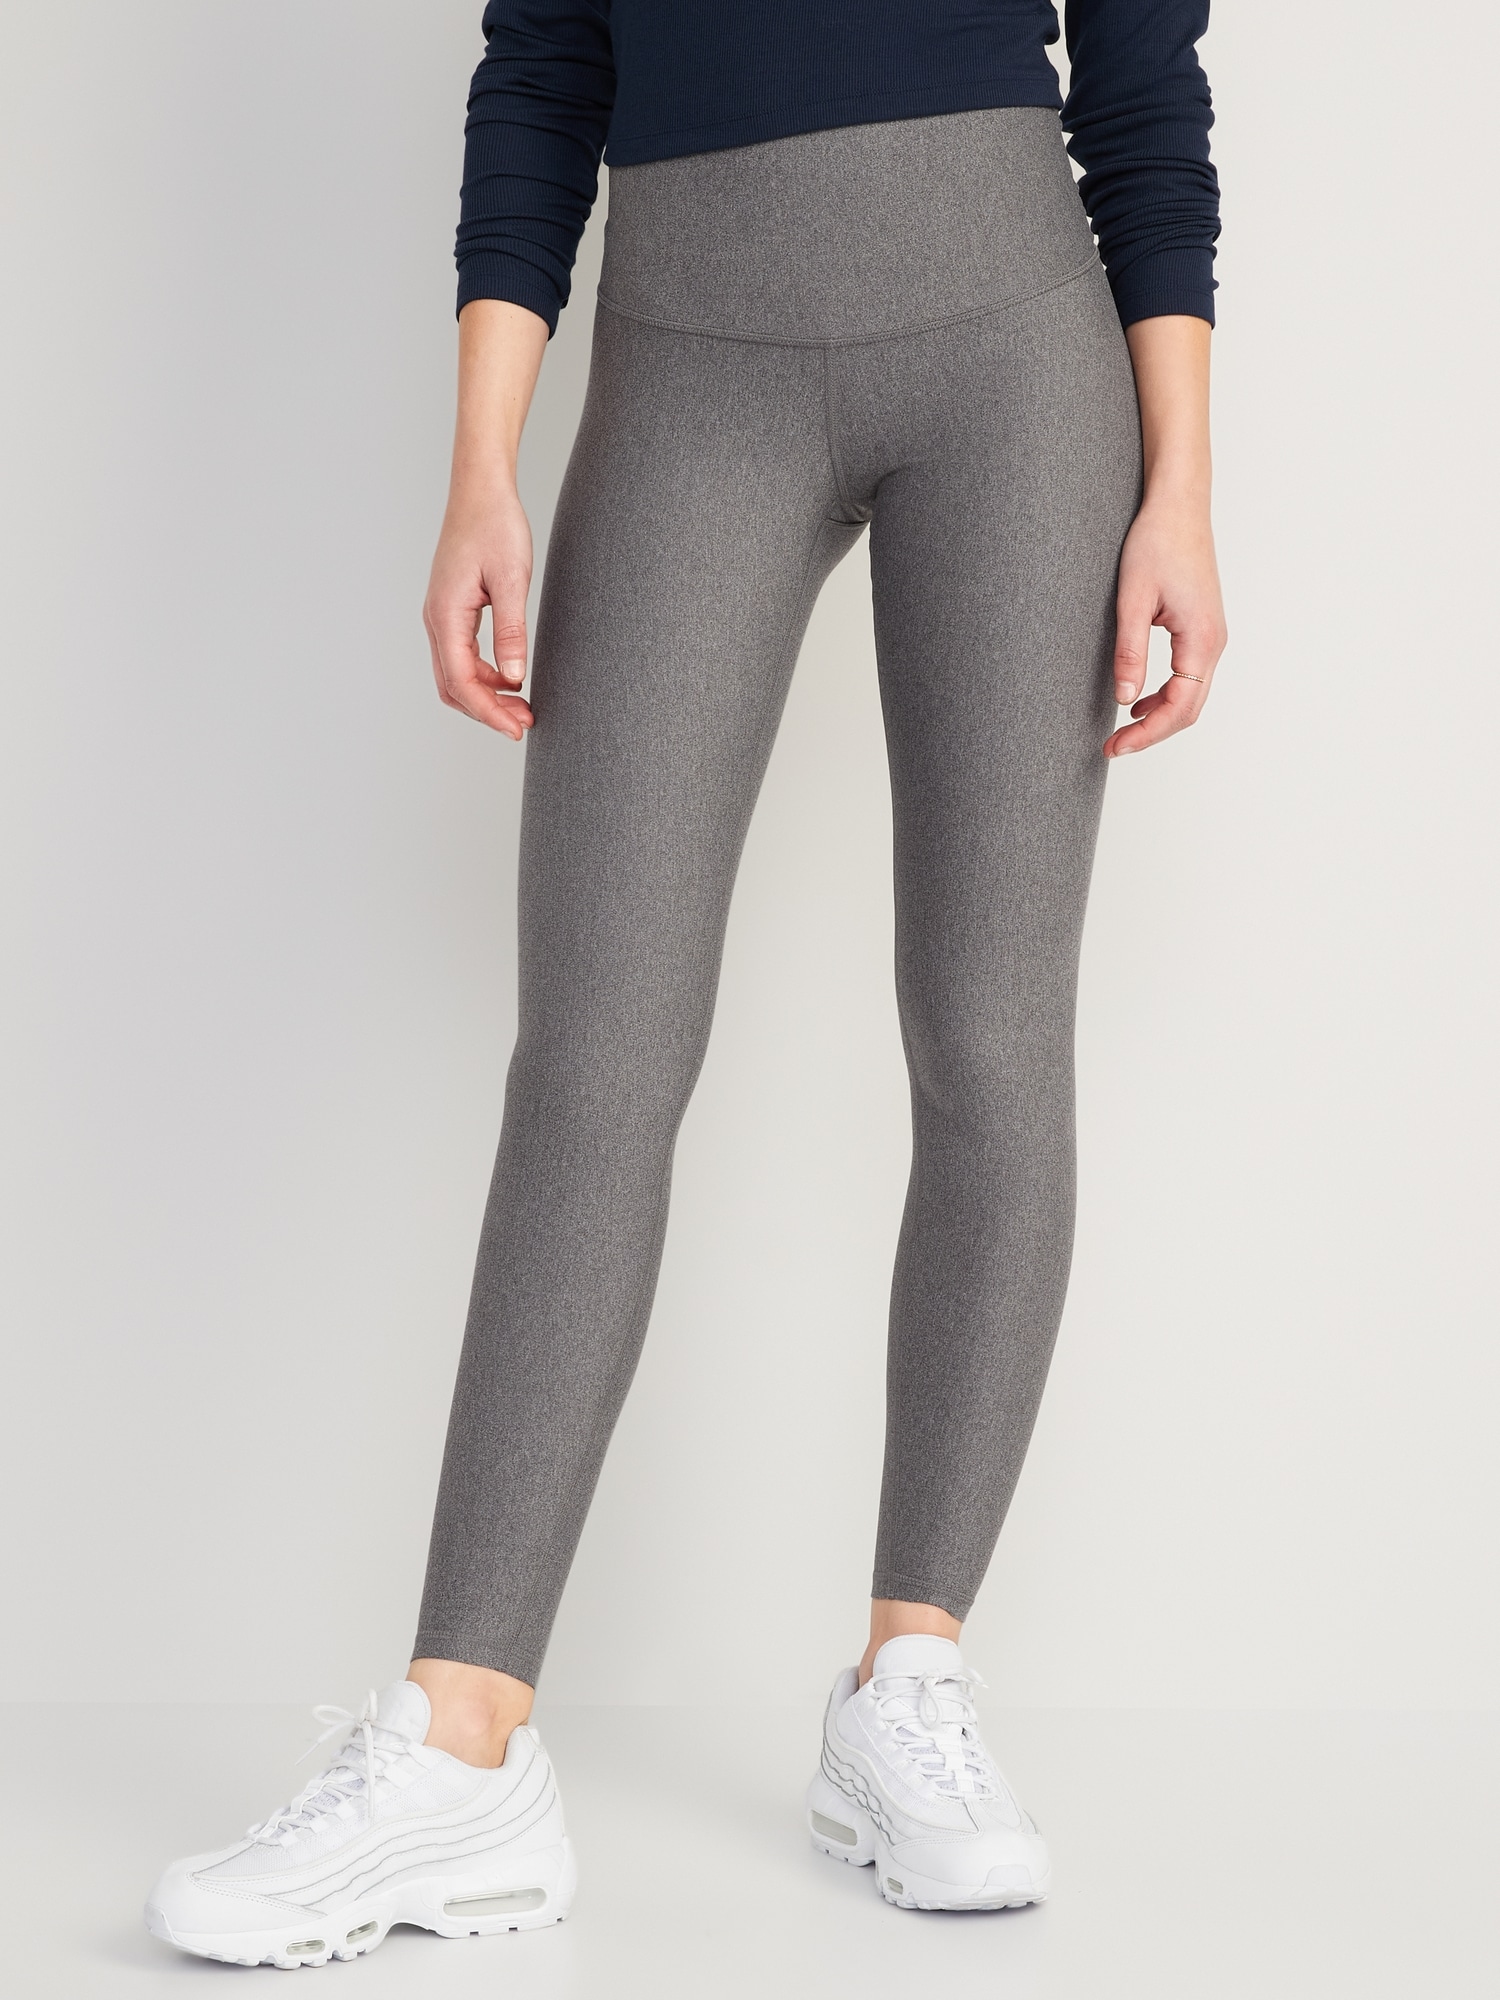 Old Navy - Extra High-Waisted PowerSoft Leggings for Women black